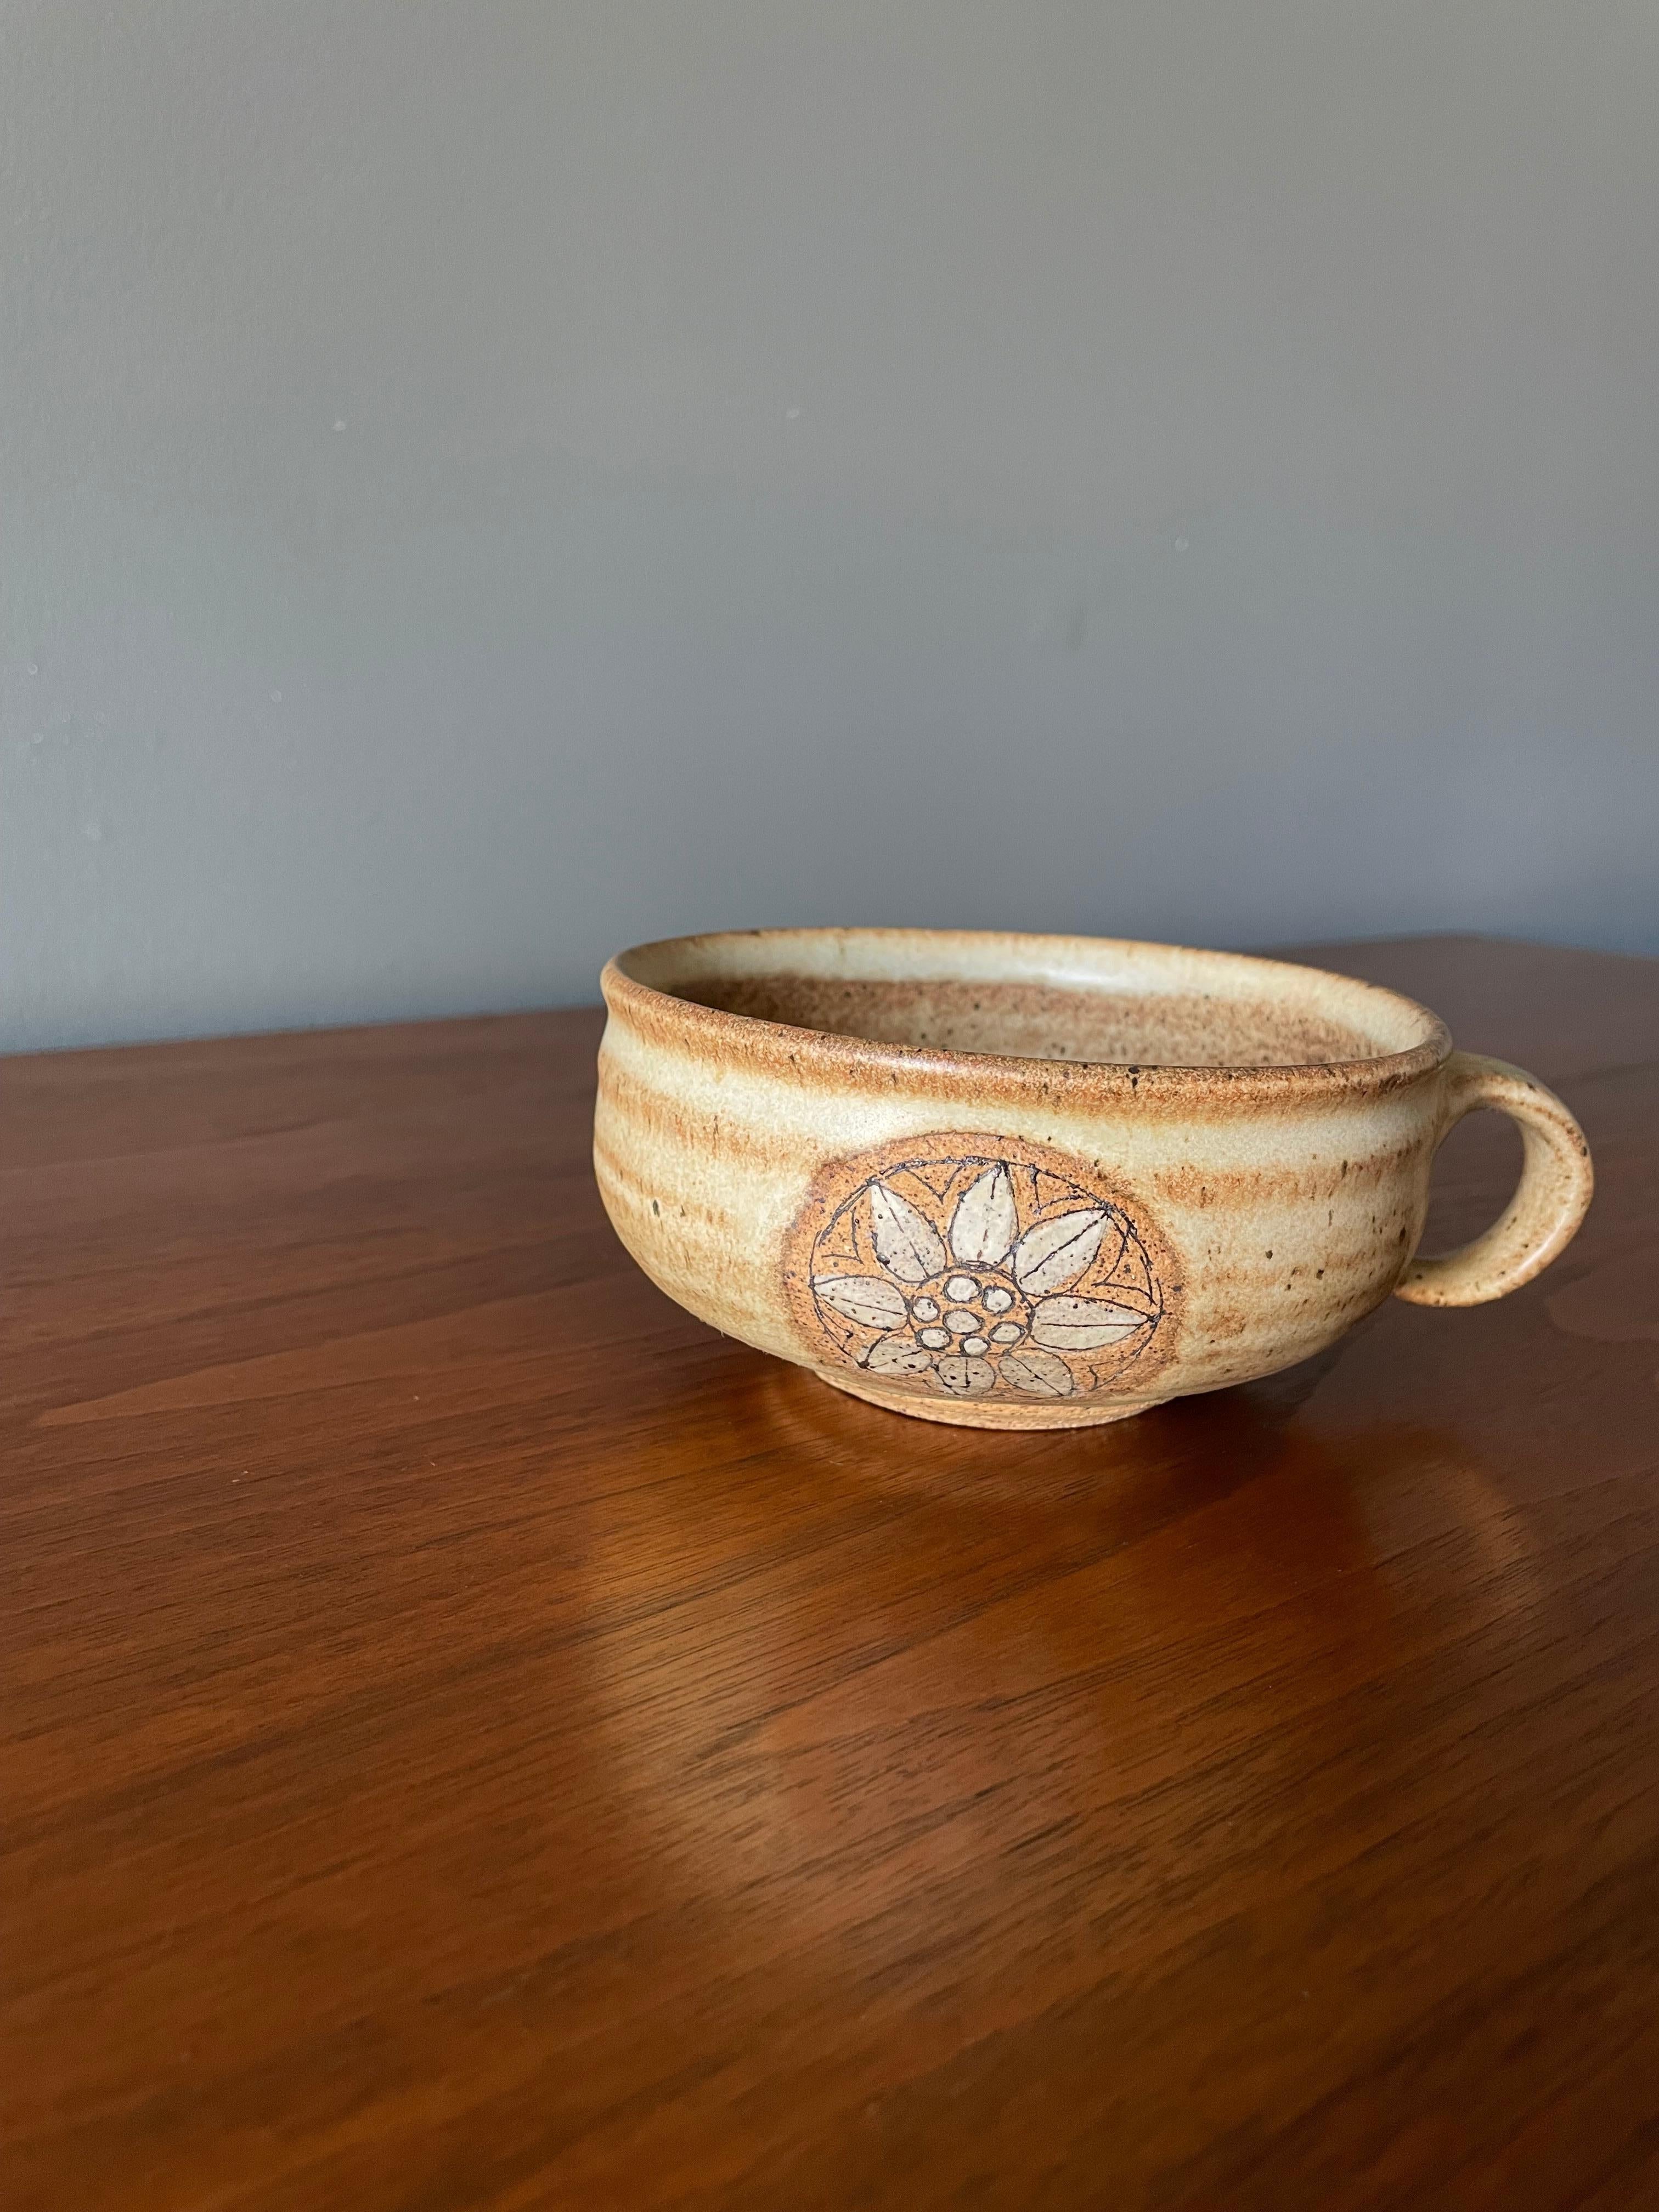 Vintage studio crafted coffee cup. Unique flower pattern and beautiful brown speckled glazing. Hand signed by the artist.